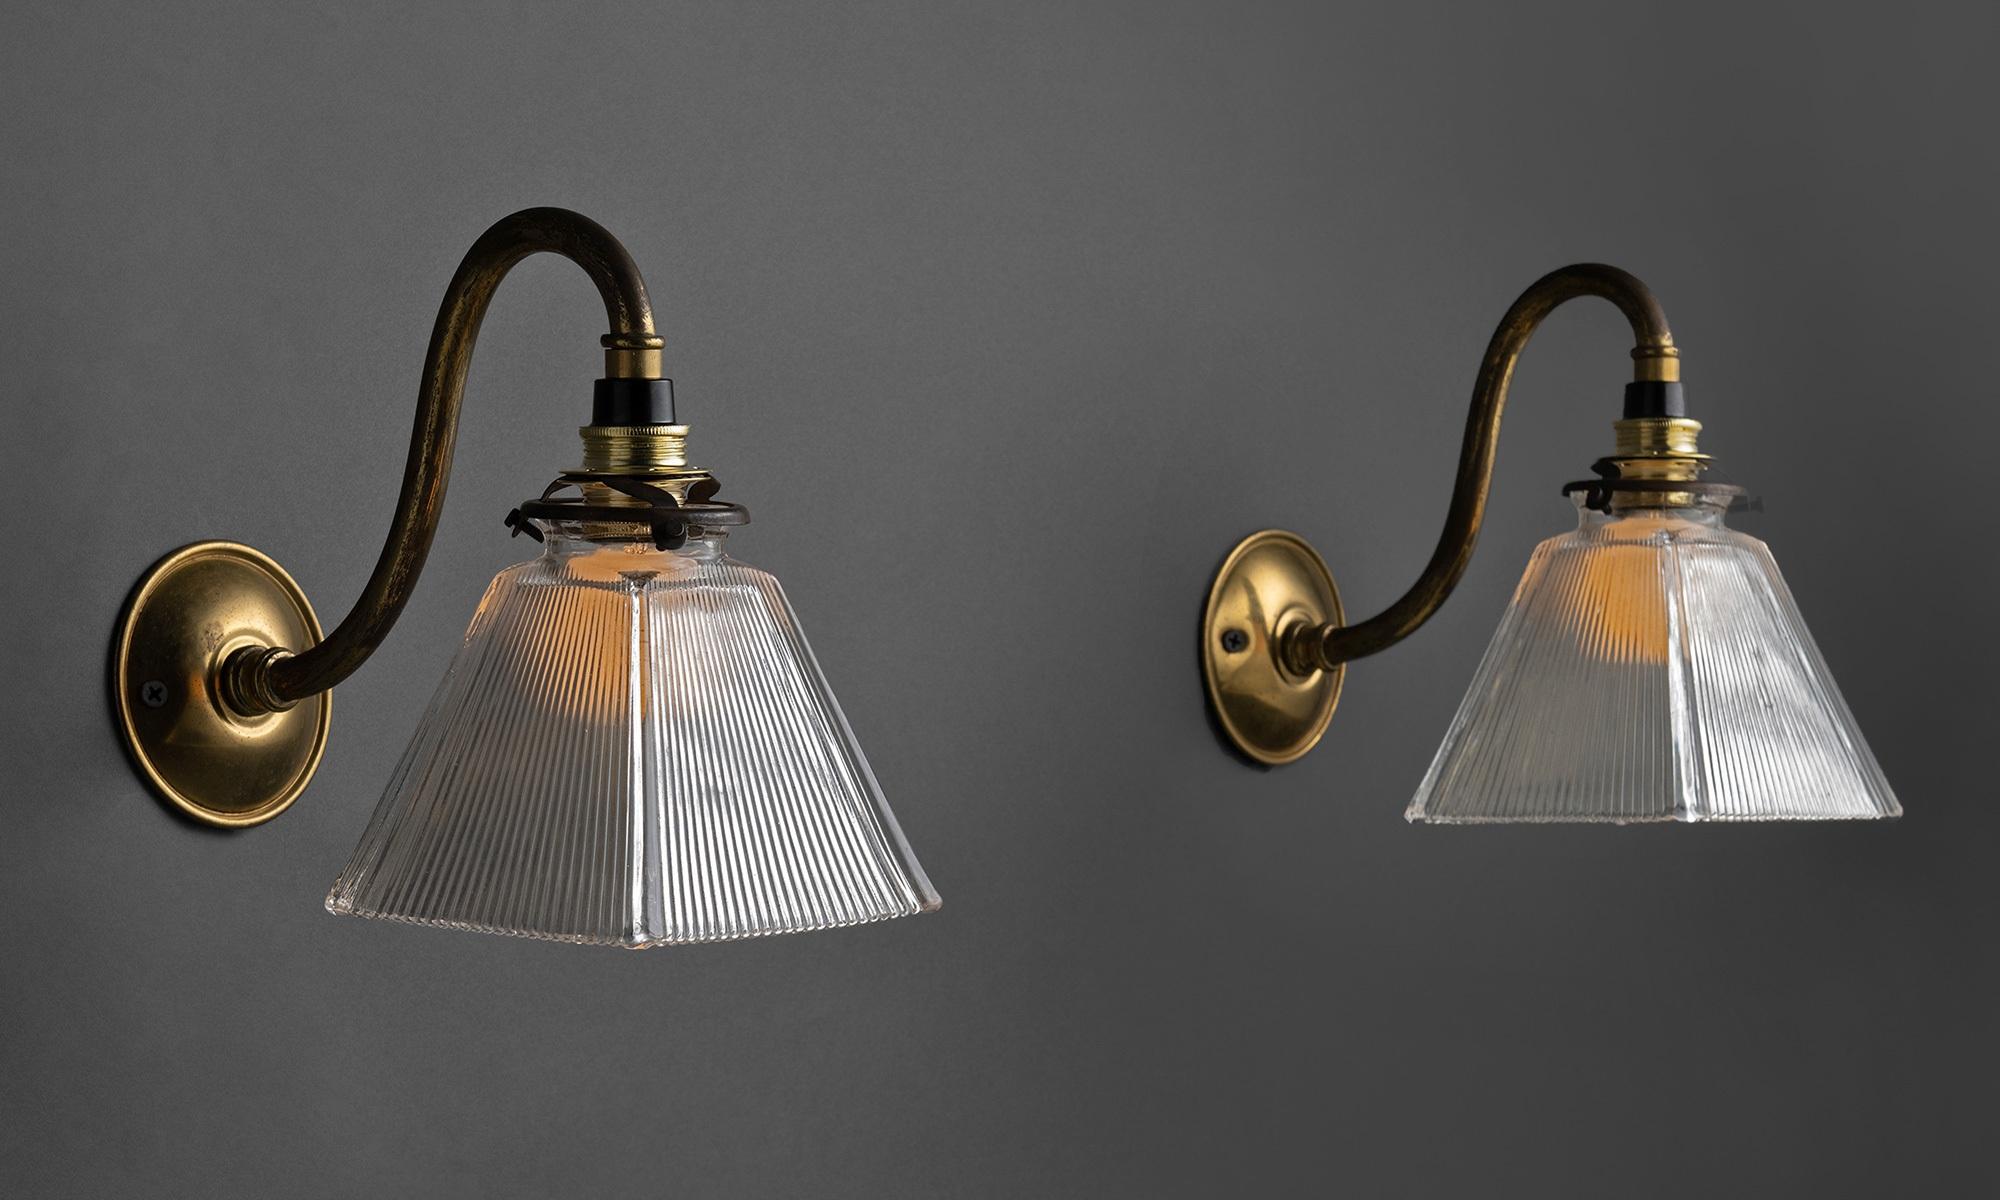 Brass & ribbed glass sconce.

England circa 1920.

Petite sconce with brass gooseneck arm and ribbed glass shade.

*Please note the price is per unit, and the lights are sold individually*